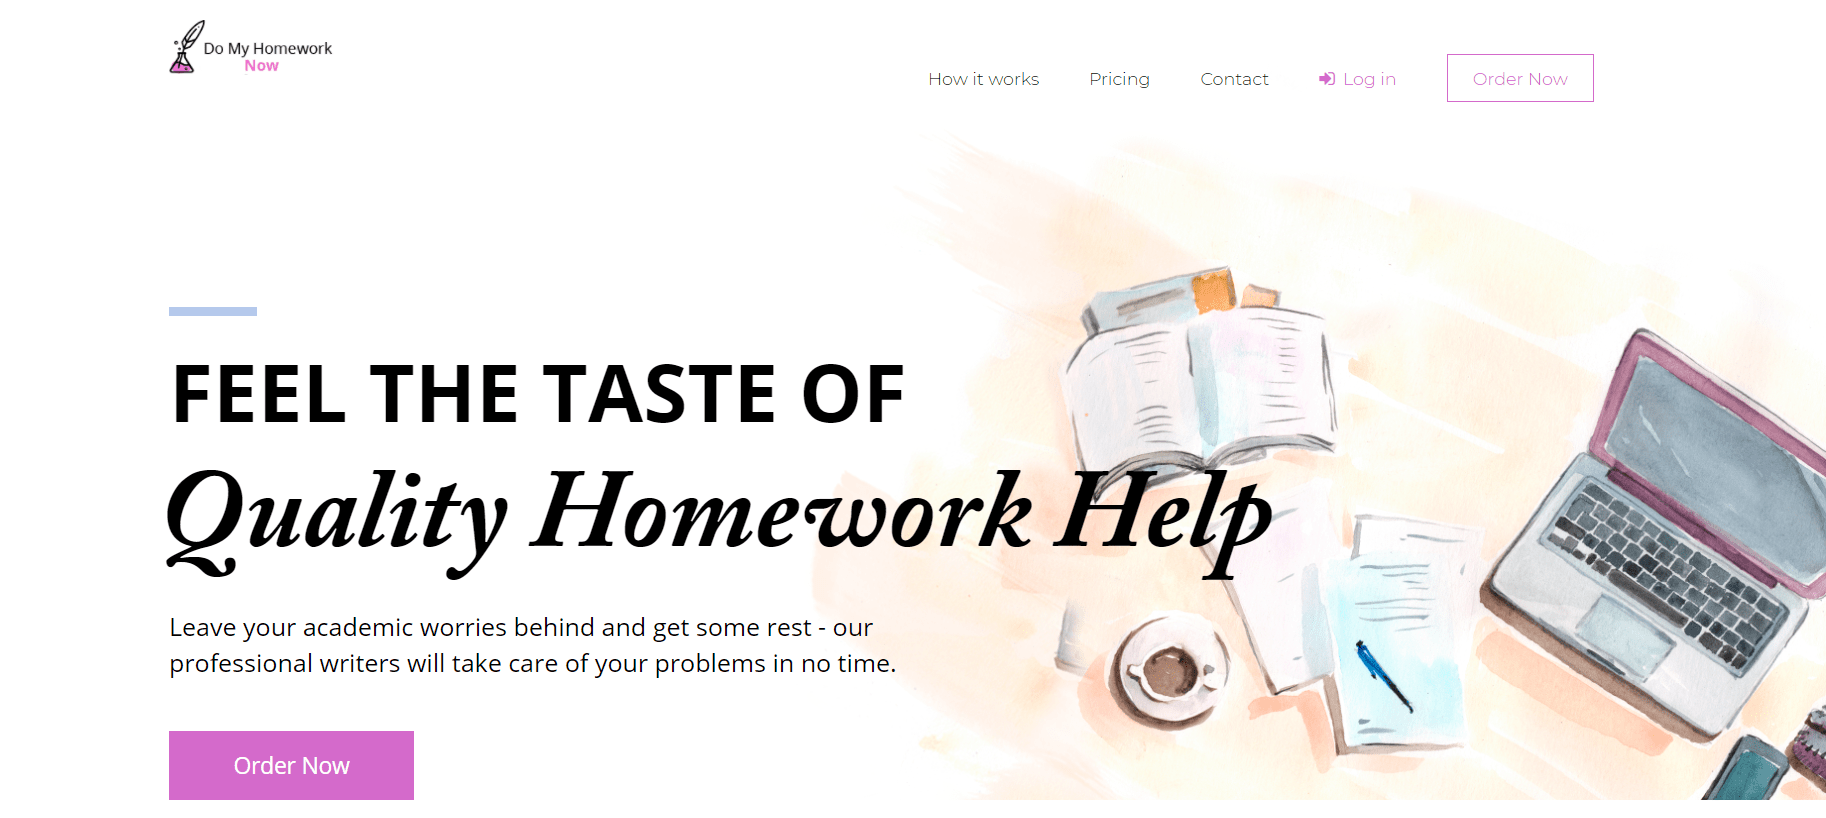 Main page at DoMyHomeworkNow